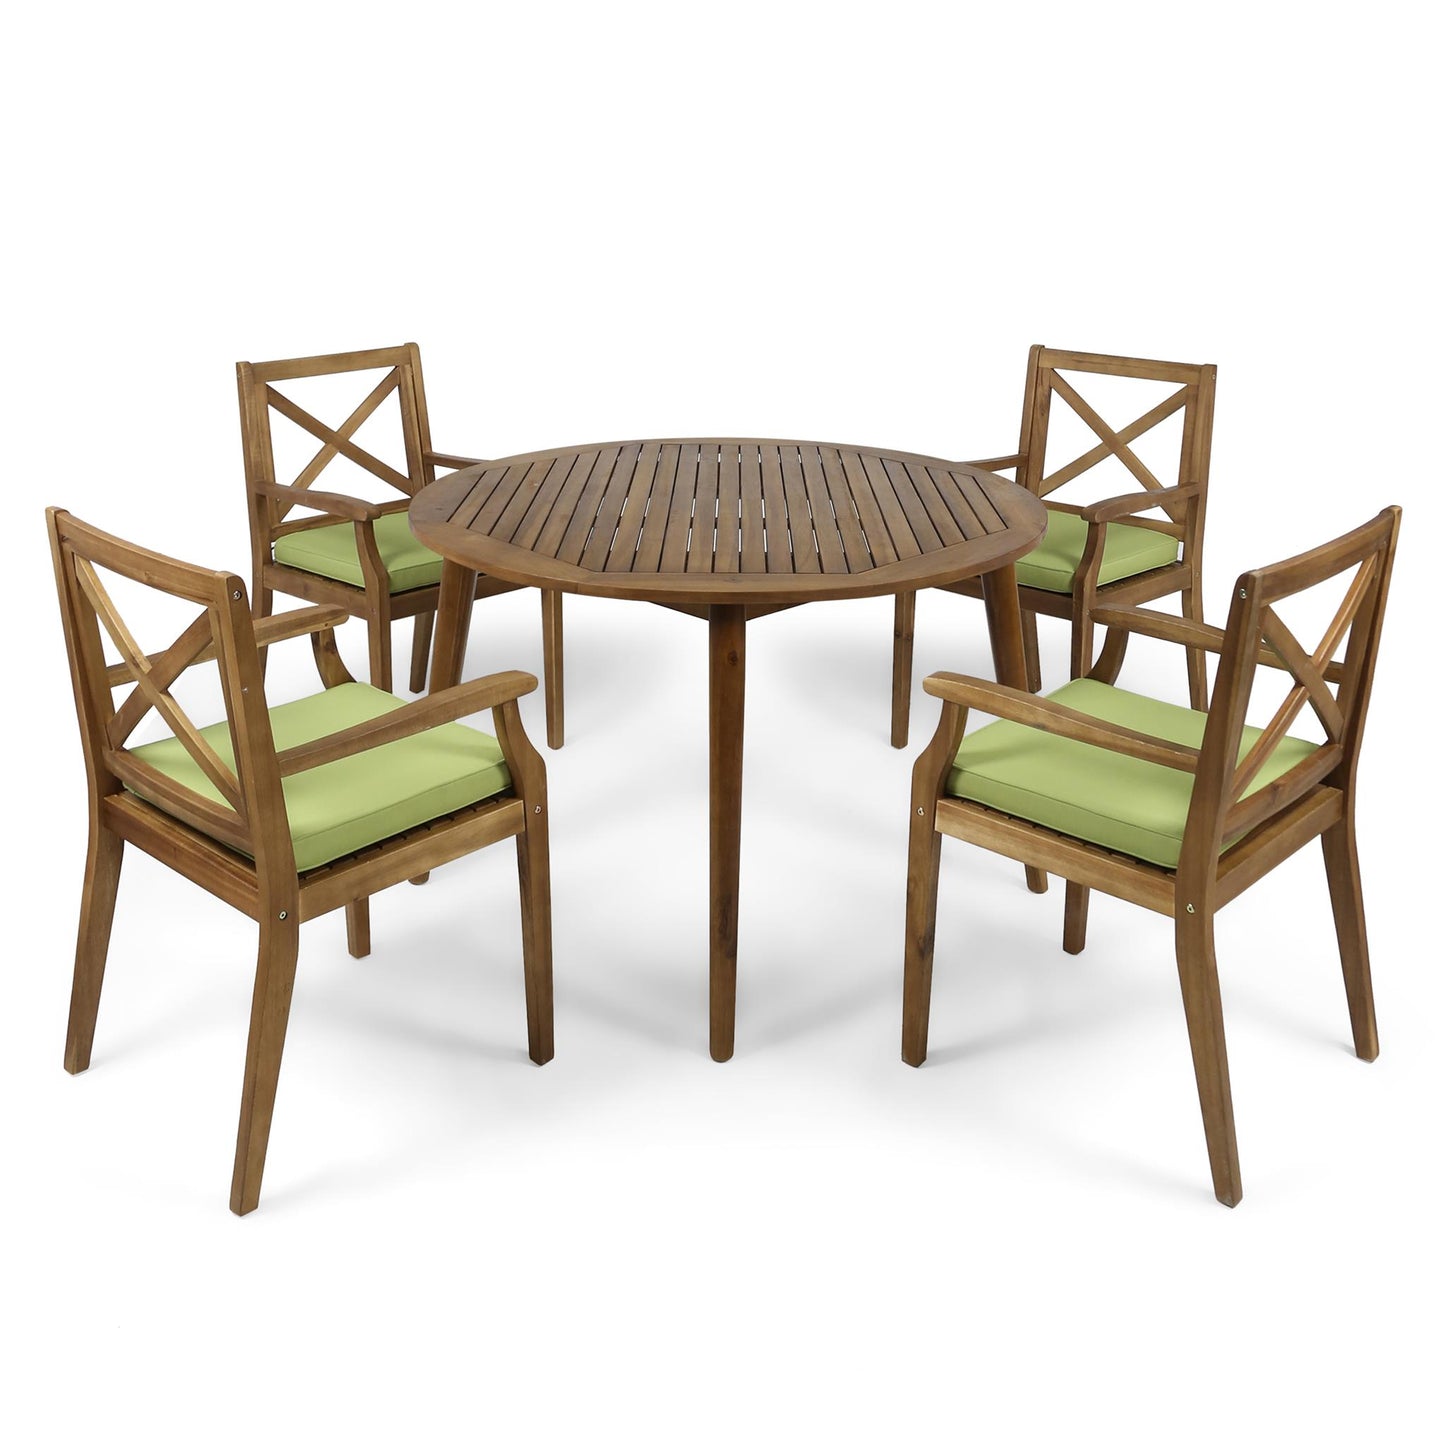 Jenson Outdoor 5 Piece Acacia Wood Dining Set with Cushions